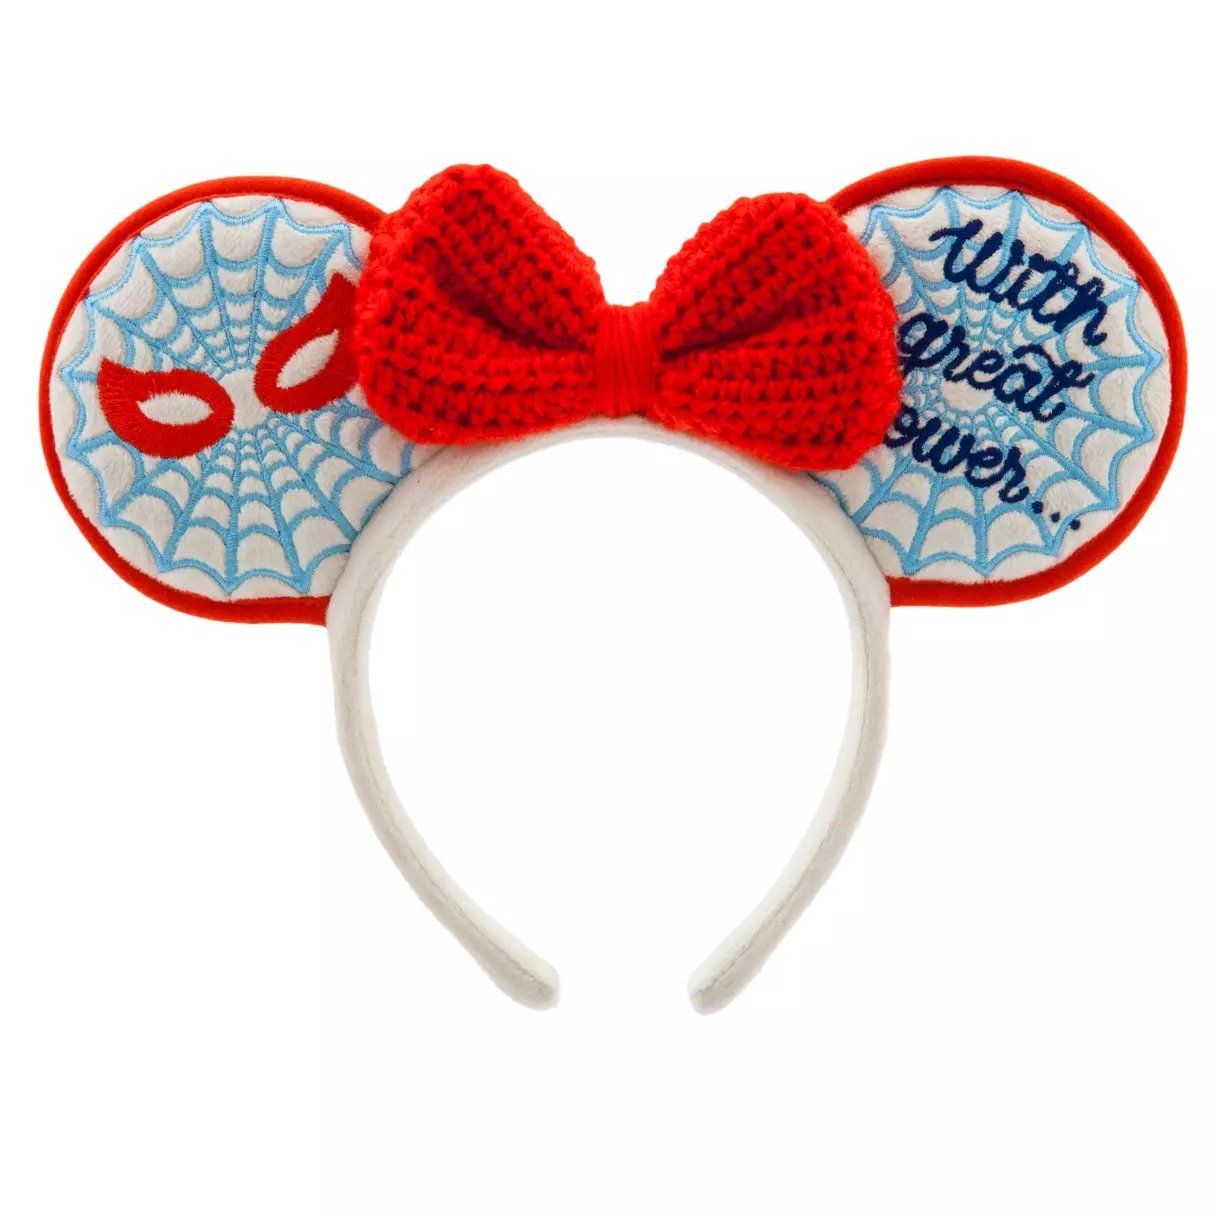 Spider-Man Cozy "With Great Power"